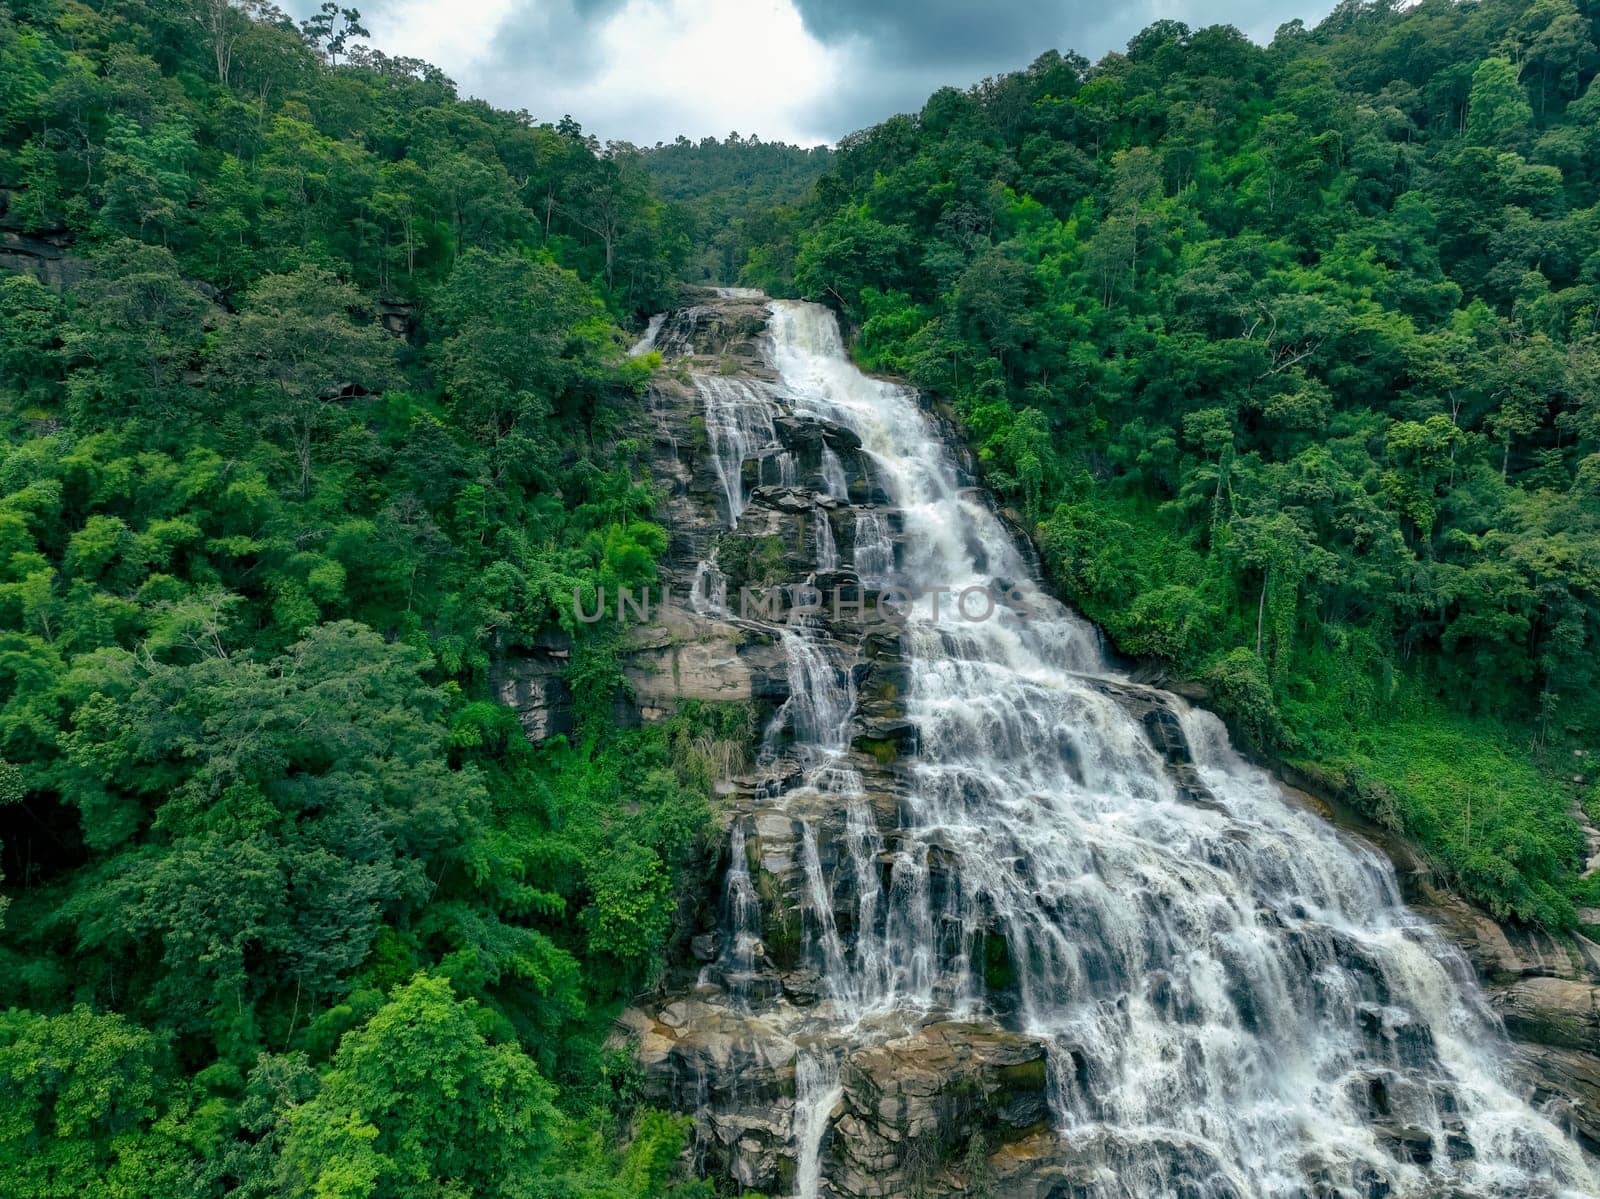 Large waterfall with lush green forest in the background. Nature landscape. Water is crystal clear and trees are full and green. Scene is serene and peaceful. Waterfall in Doi Inthanon National Park